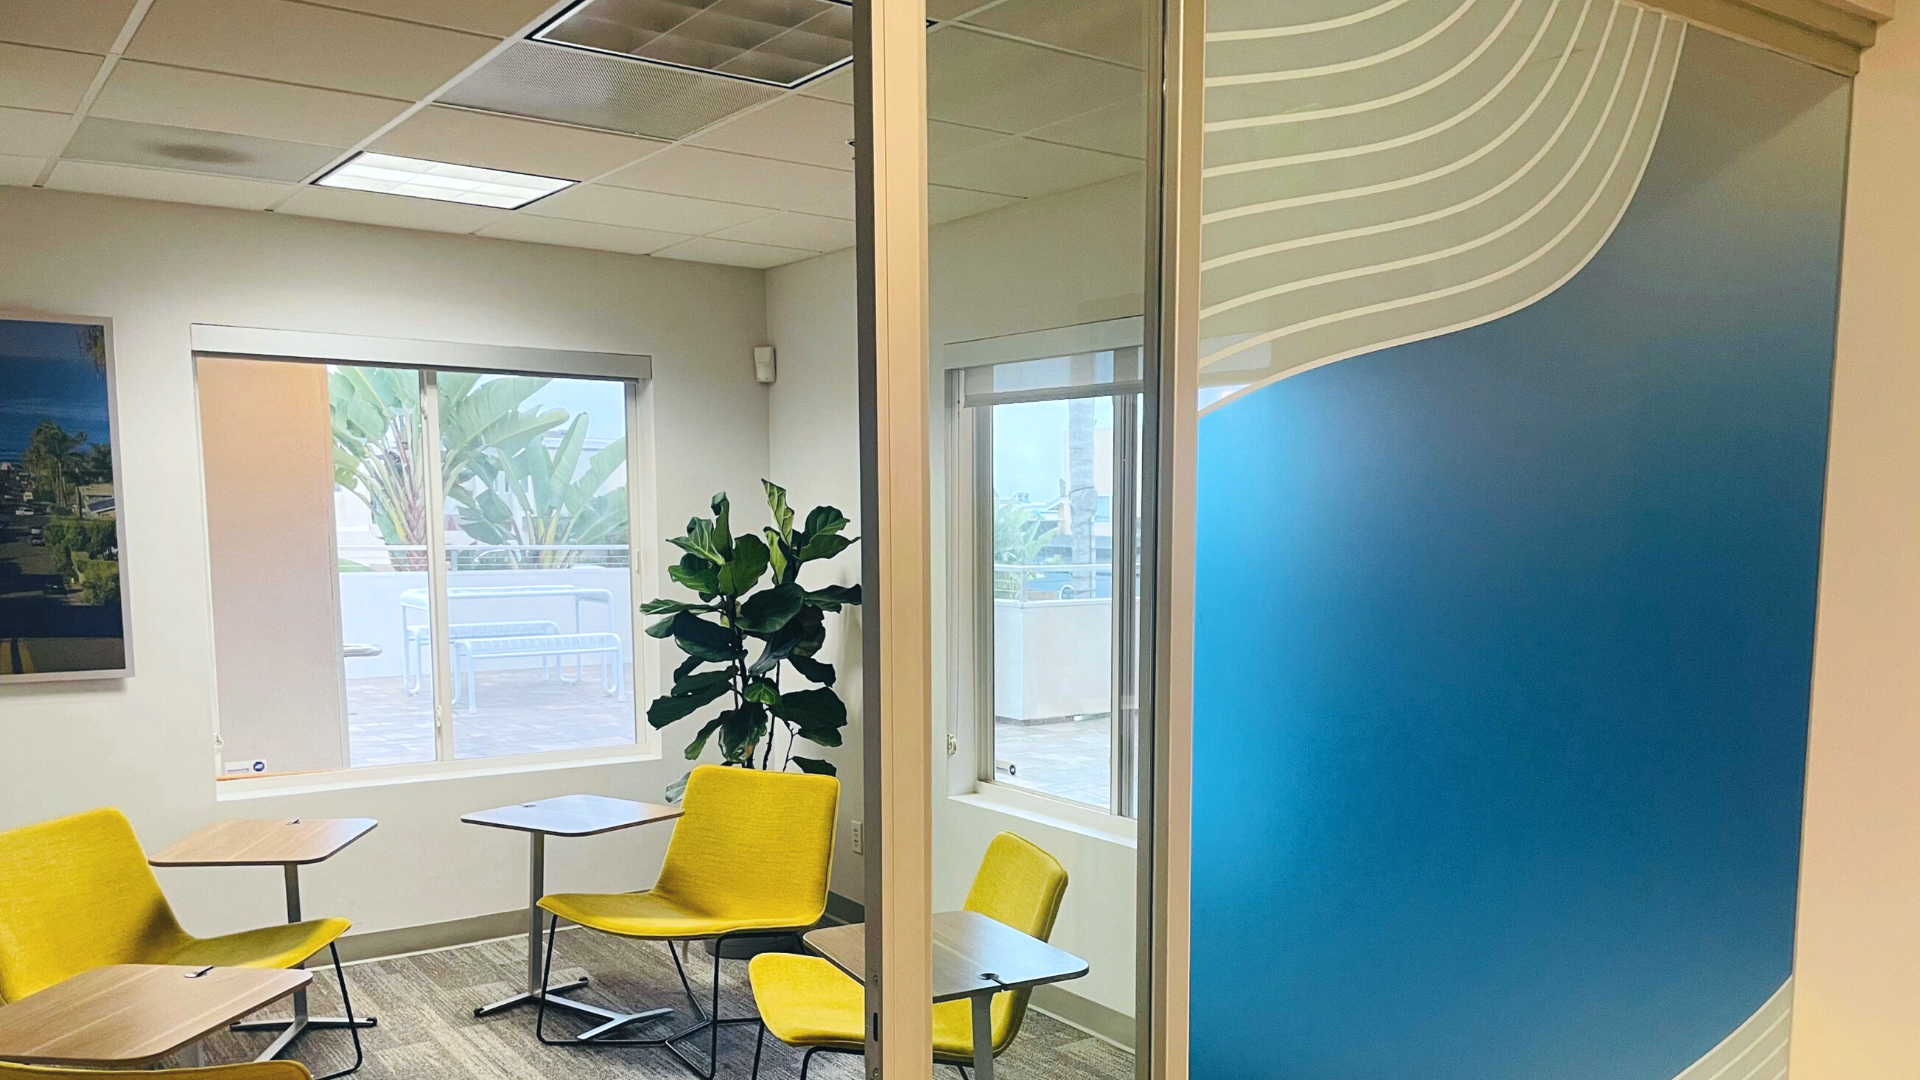 San Diego interior design office space with blue and white screen on glass door, yellow chairs and tables inside meeting room